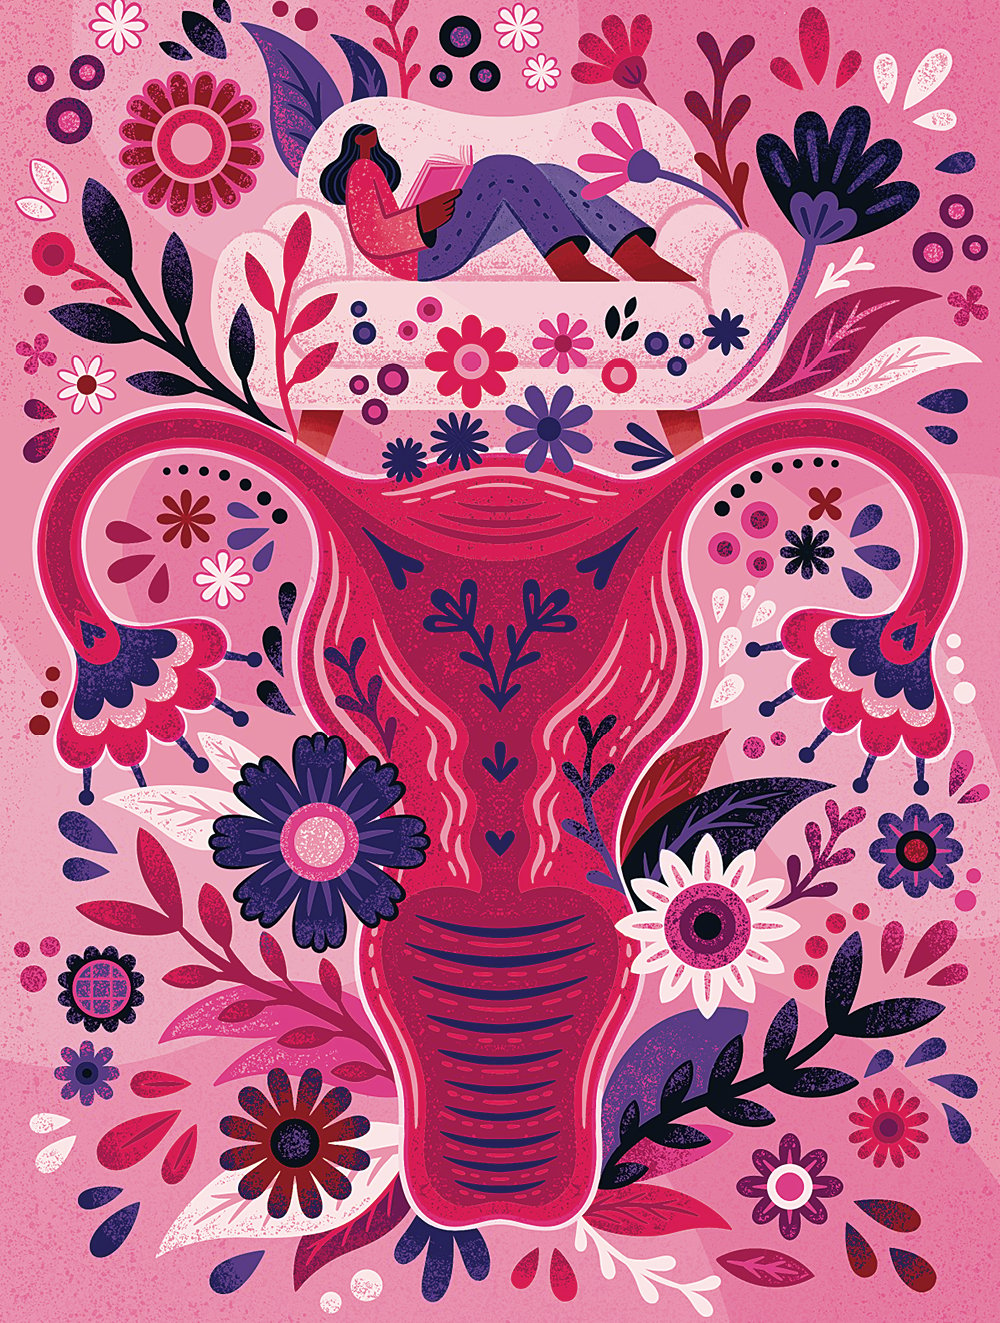 An illustration of a uterus with pink decorative flowers and designs